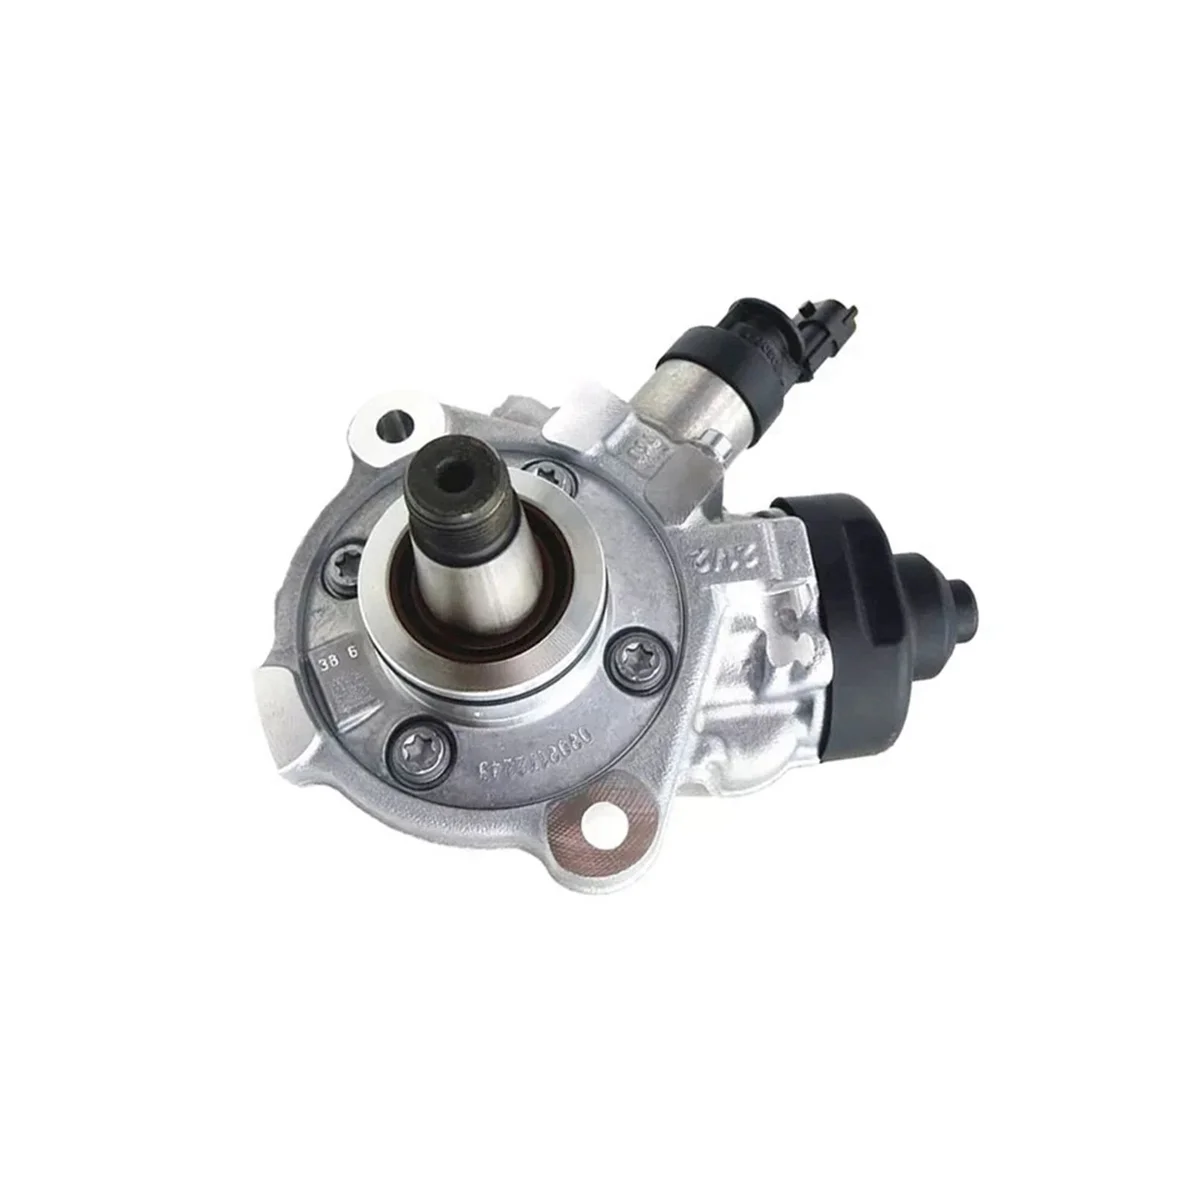 

0445010511 0445010544 Car Engine Fuel Injection Pumps for Cars Part Number 33100-2F000